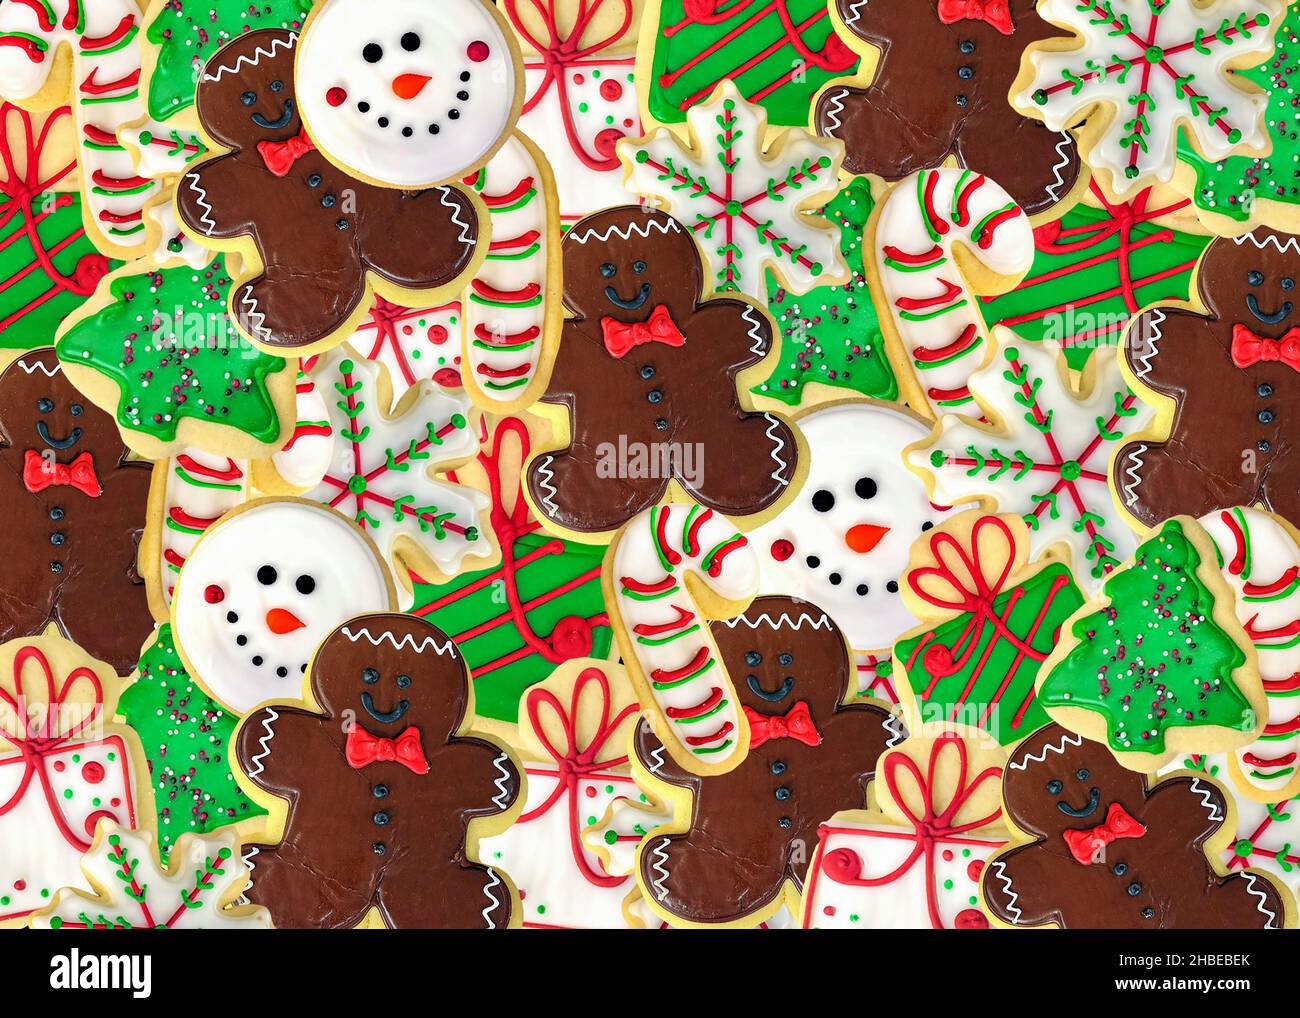 Colorful Christmas sugar cookie collection Stock Photo